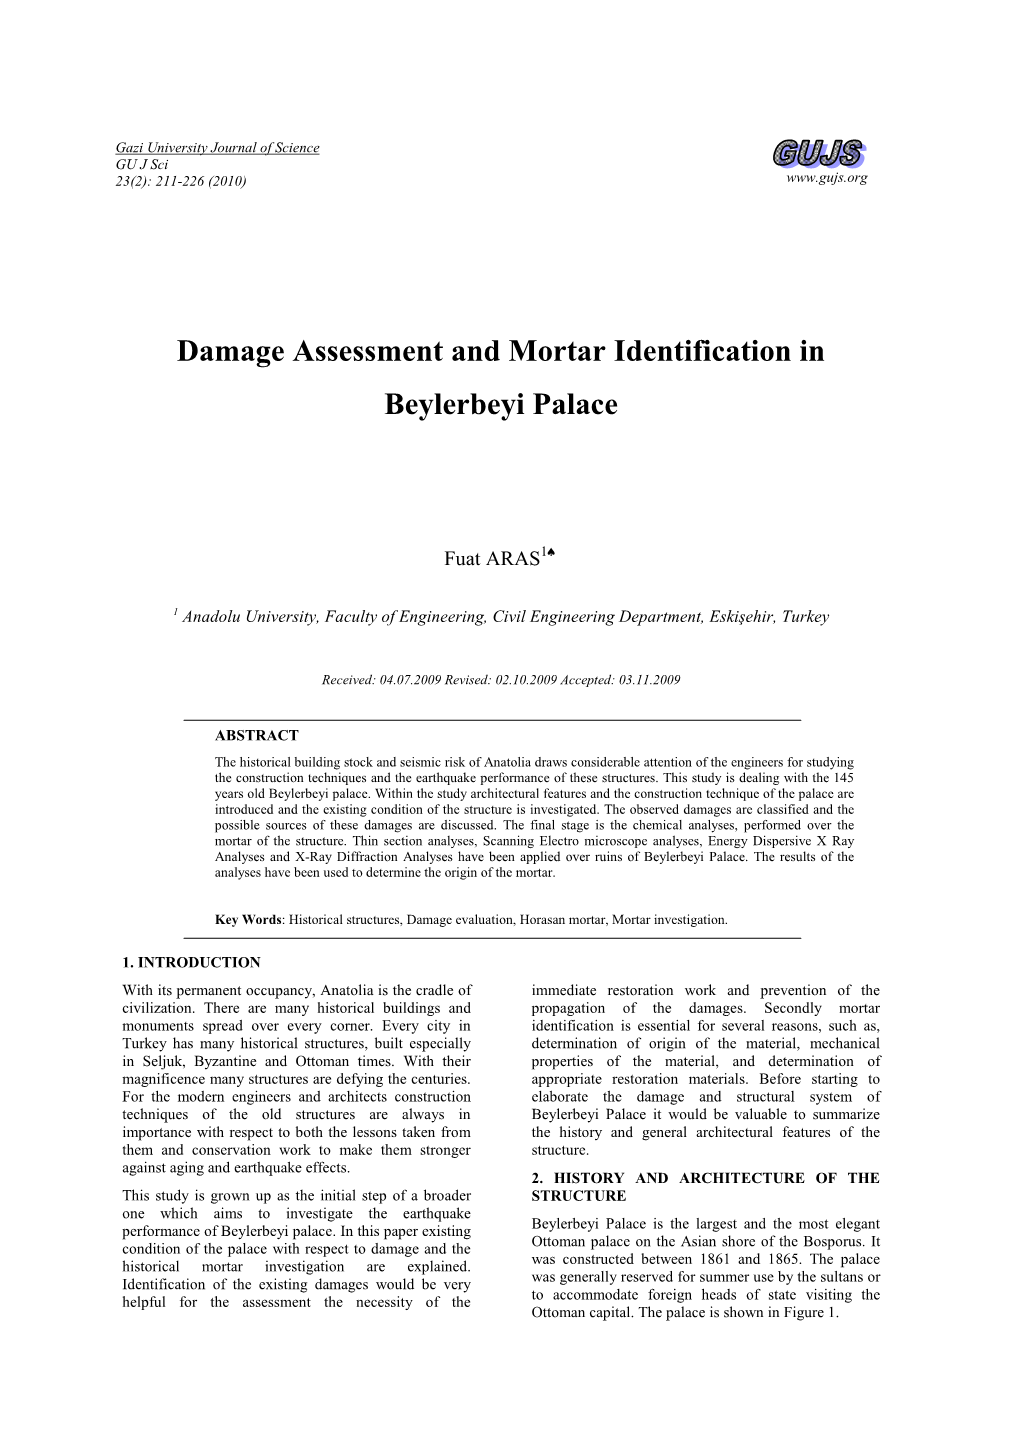 Damage Assessment and Mortar Identification in Beylerbeyi Palace